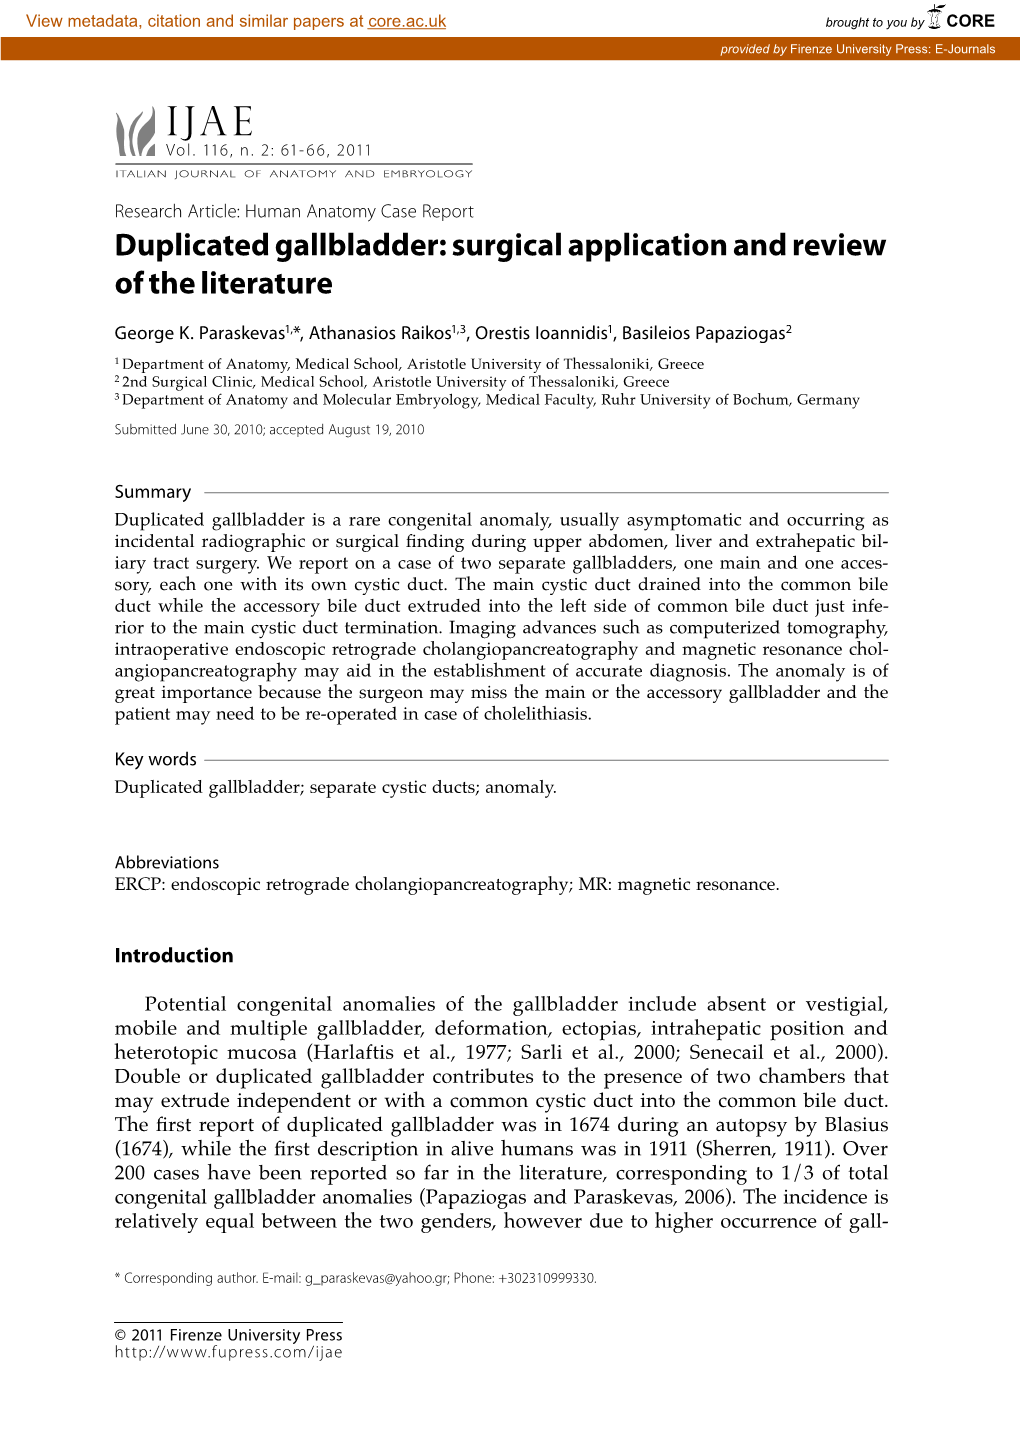 Duplicated Gallbladder: Surgical Application and Review of the Literature